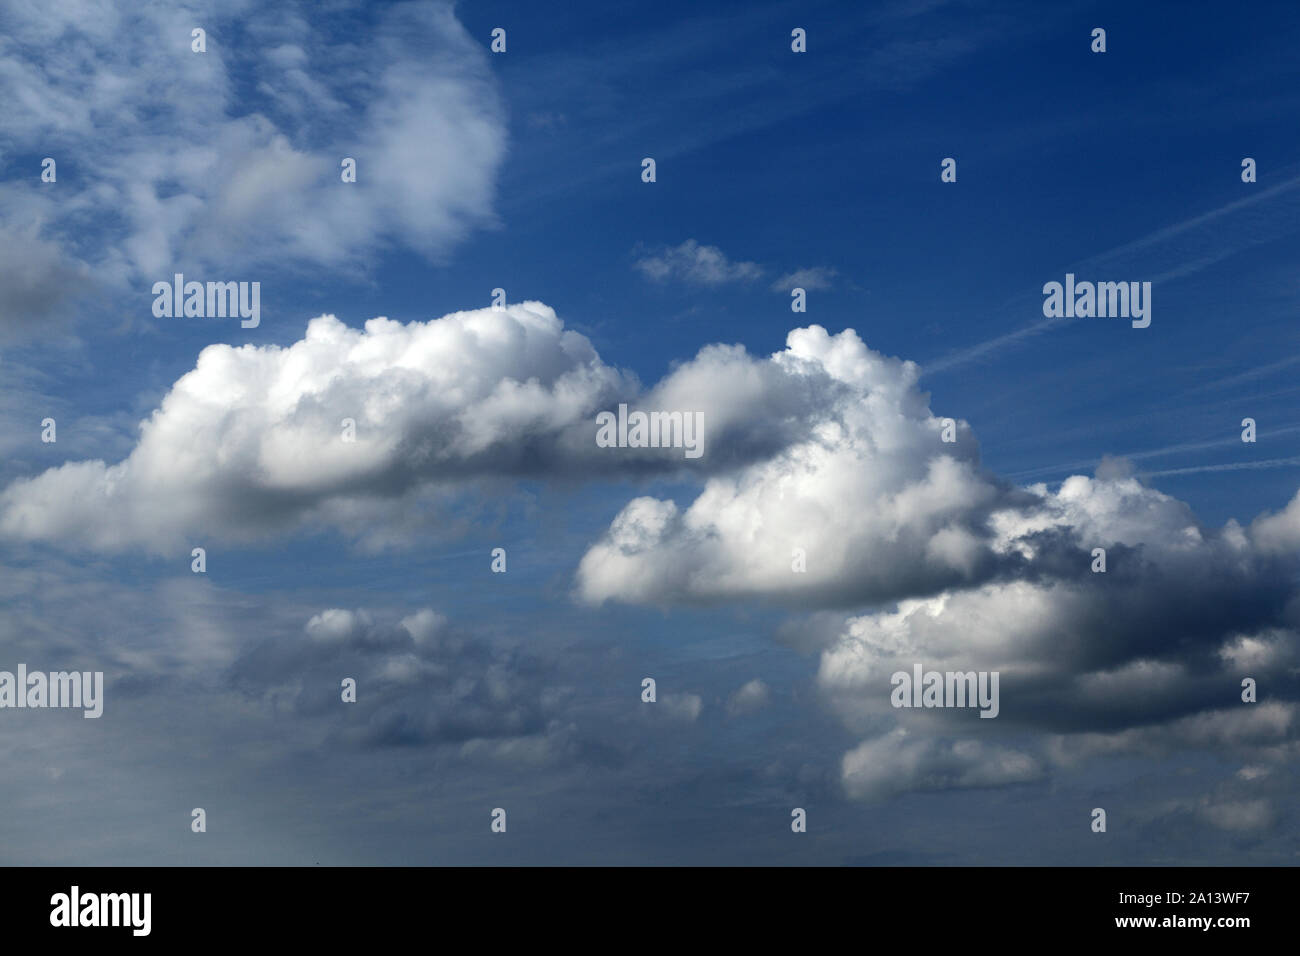 white, grey, dark, cloud, clouds, formation, blue sky, skies, weather Stock Photo